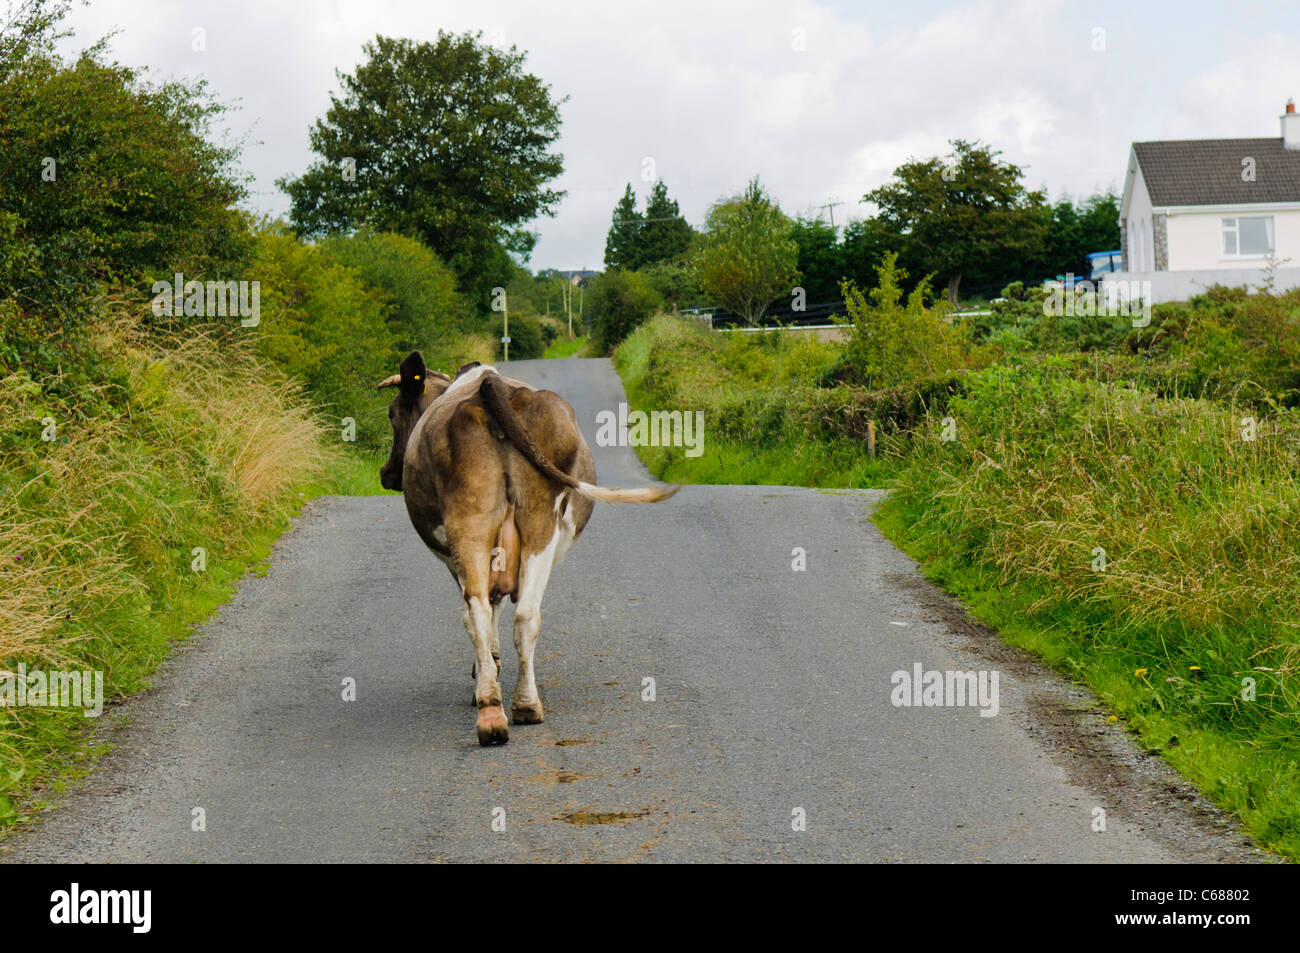 Cow in the middle of a country road Stock Photo